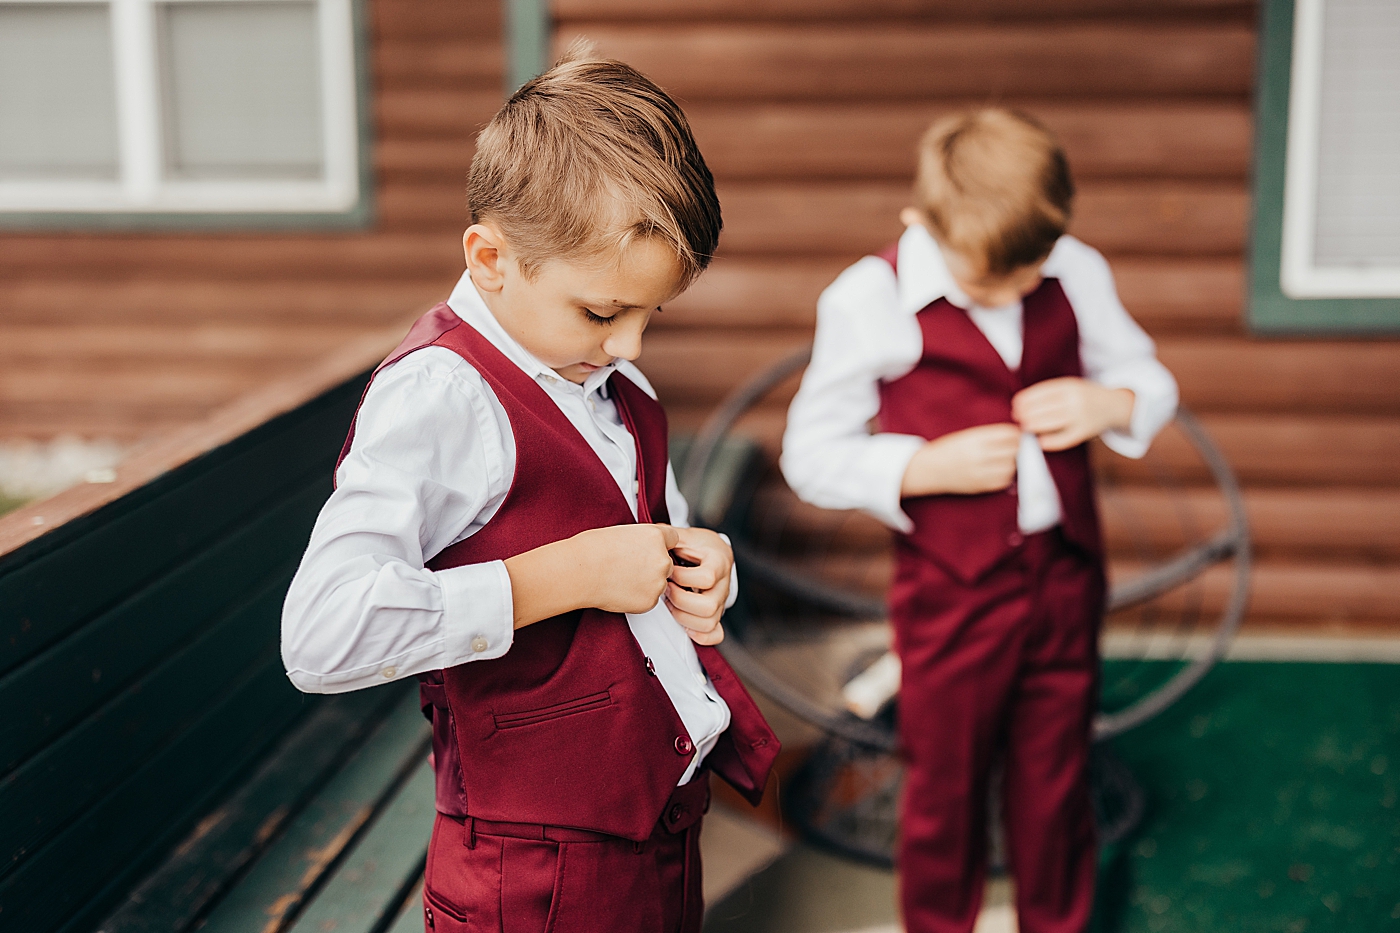 Boys in maroon suits. Photo by Megan Montalvo Photography.